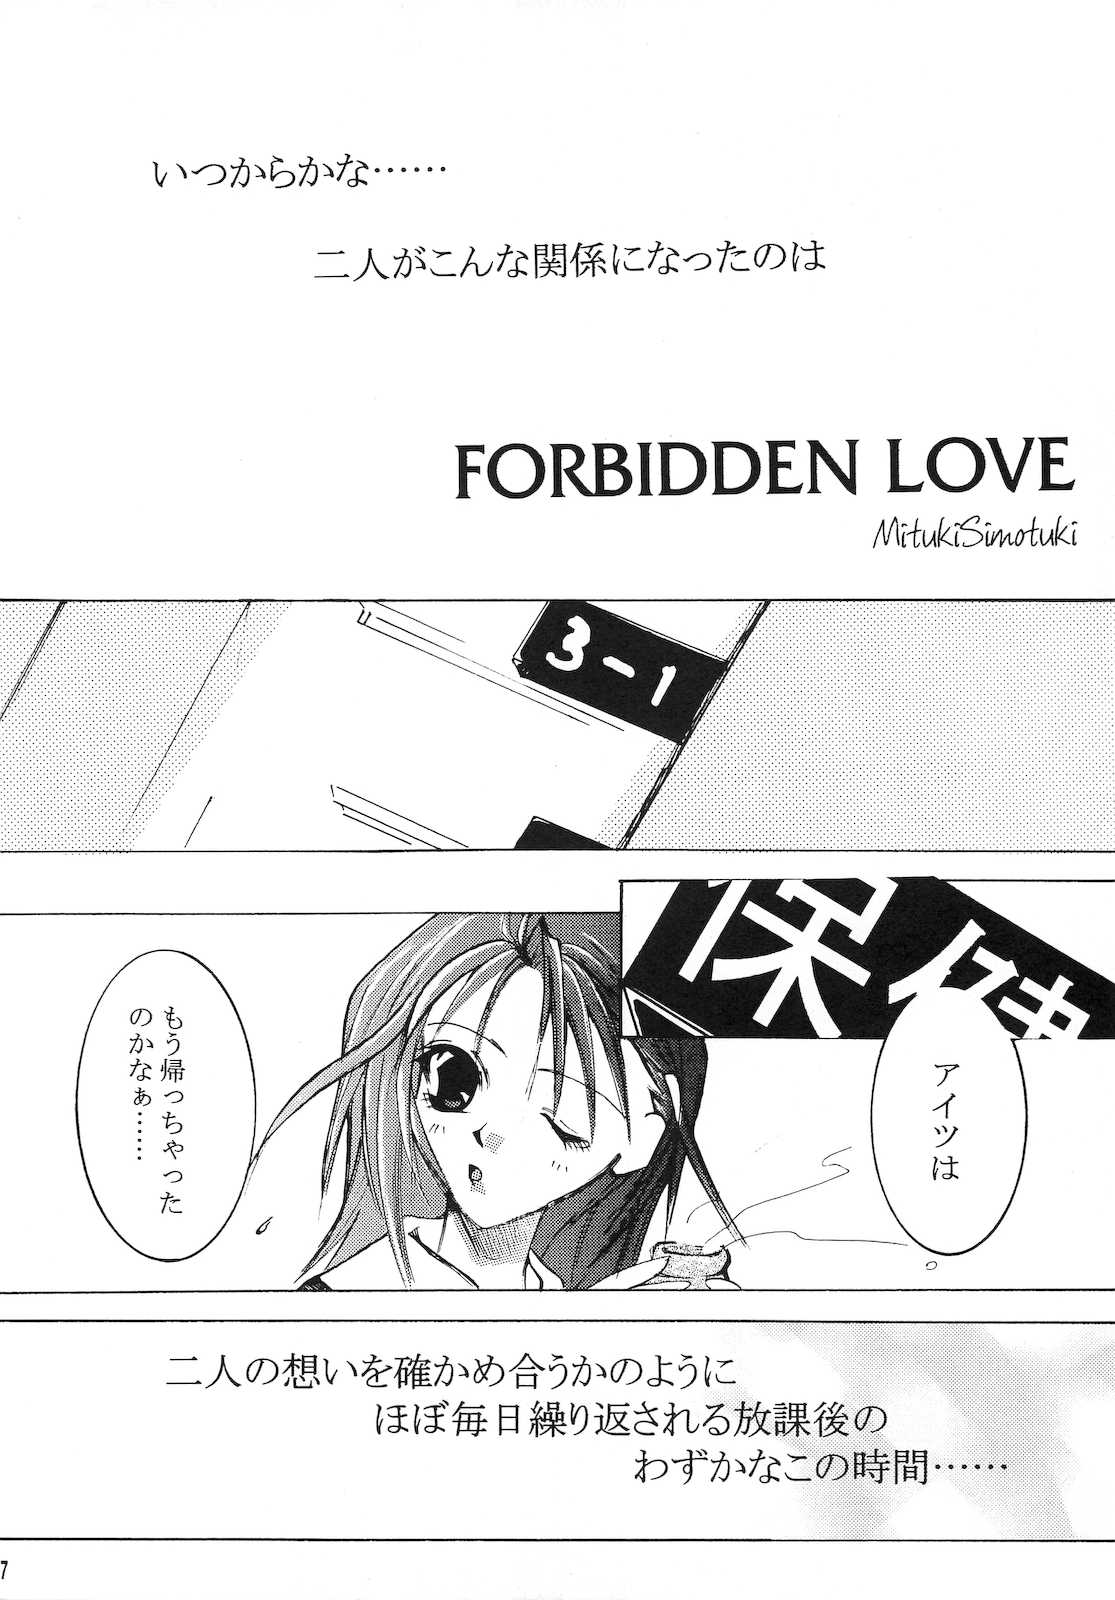 [Genei Humanoid as VeryBerry] Forbidden Love (With You) [幻影ヒューマノイド as VeryBerry] Forbidden Love (With You)